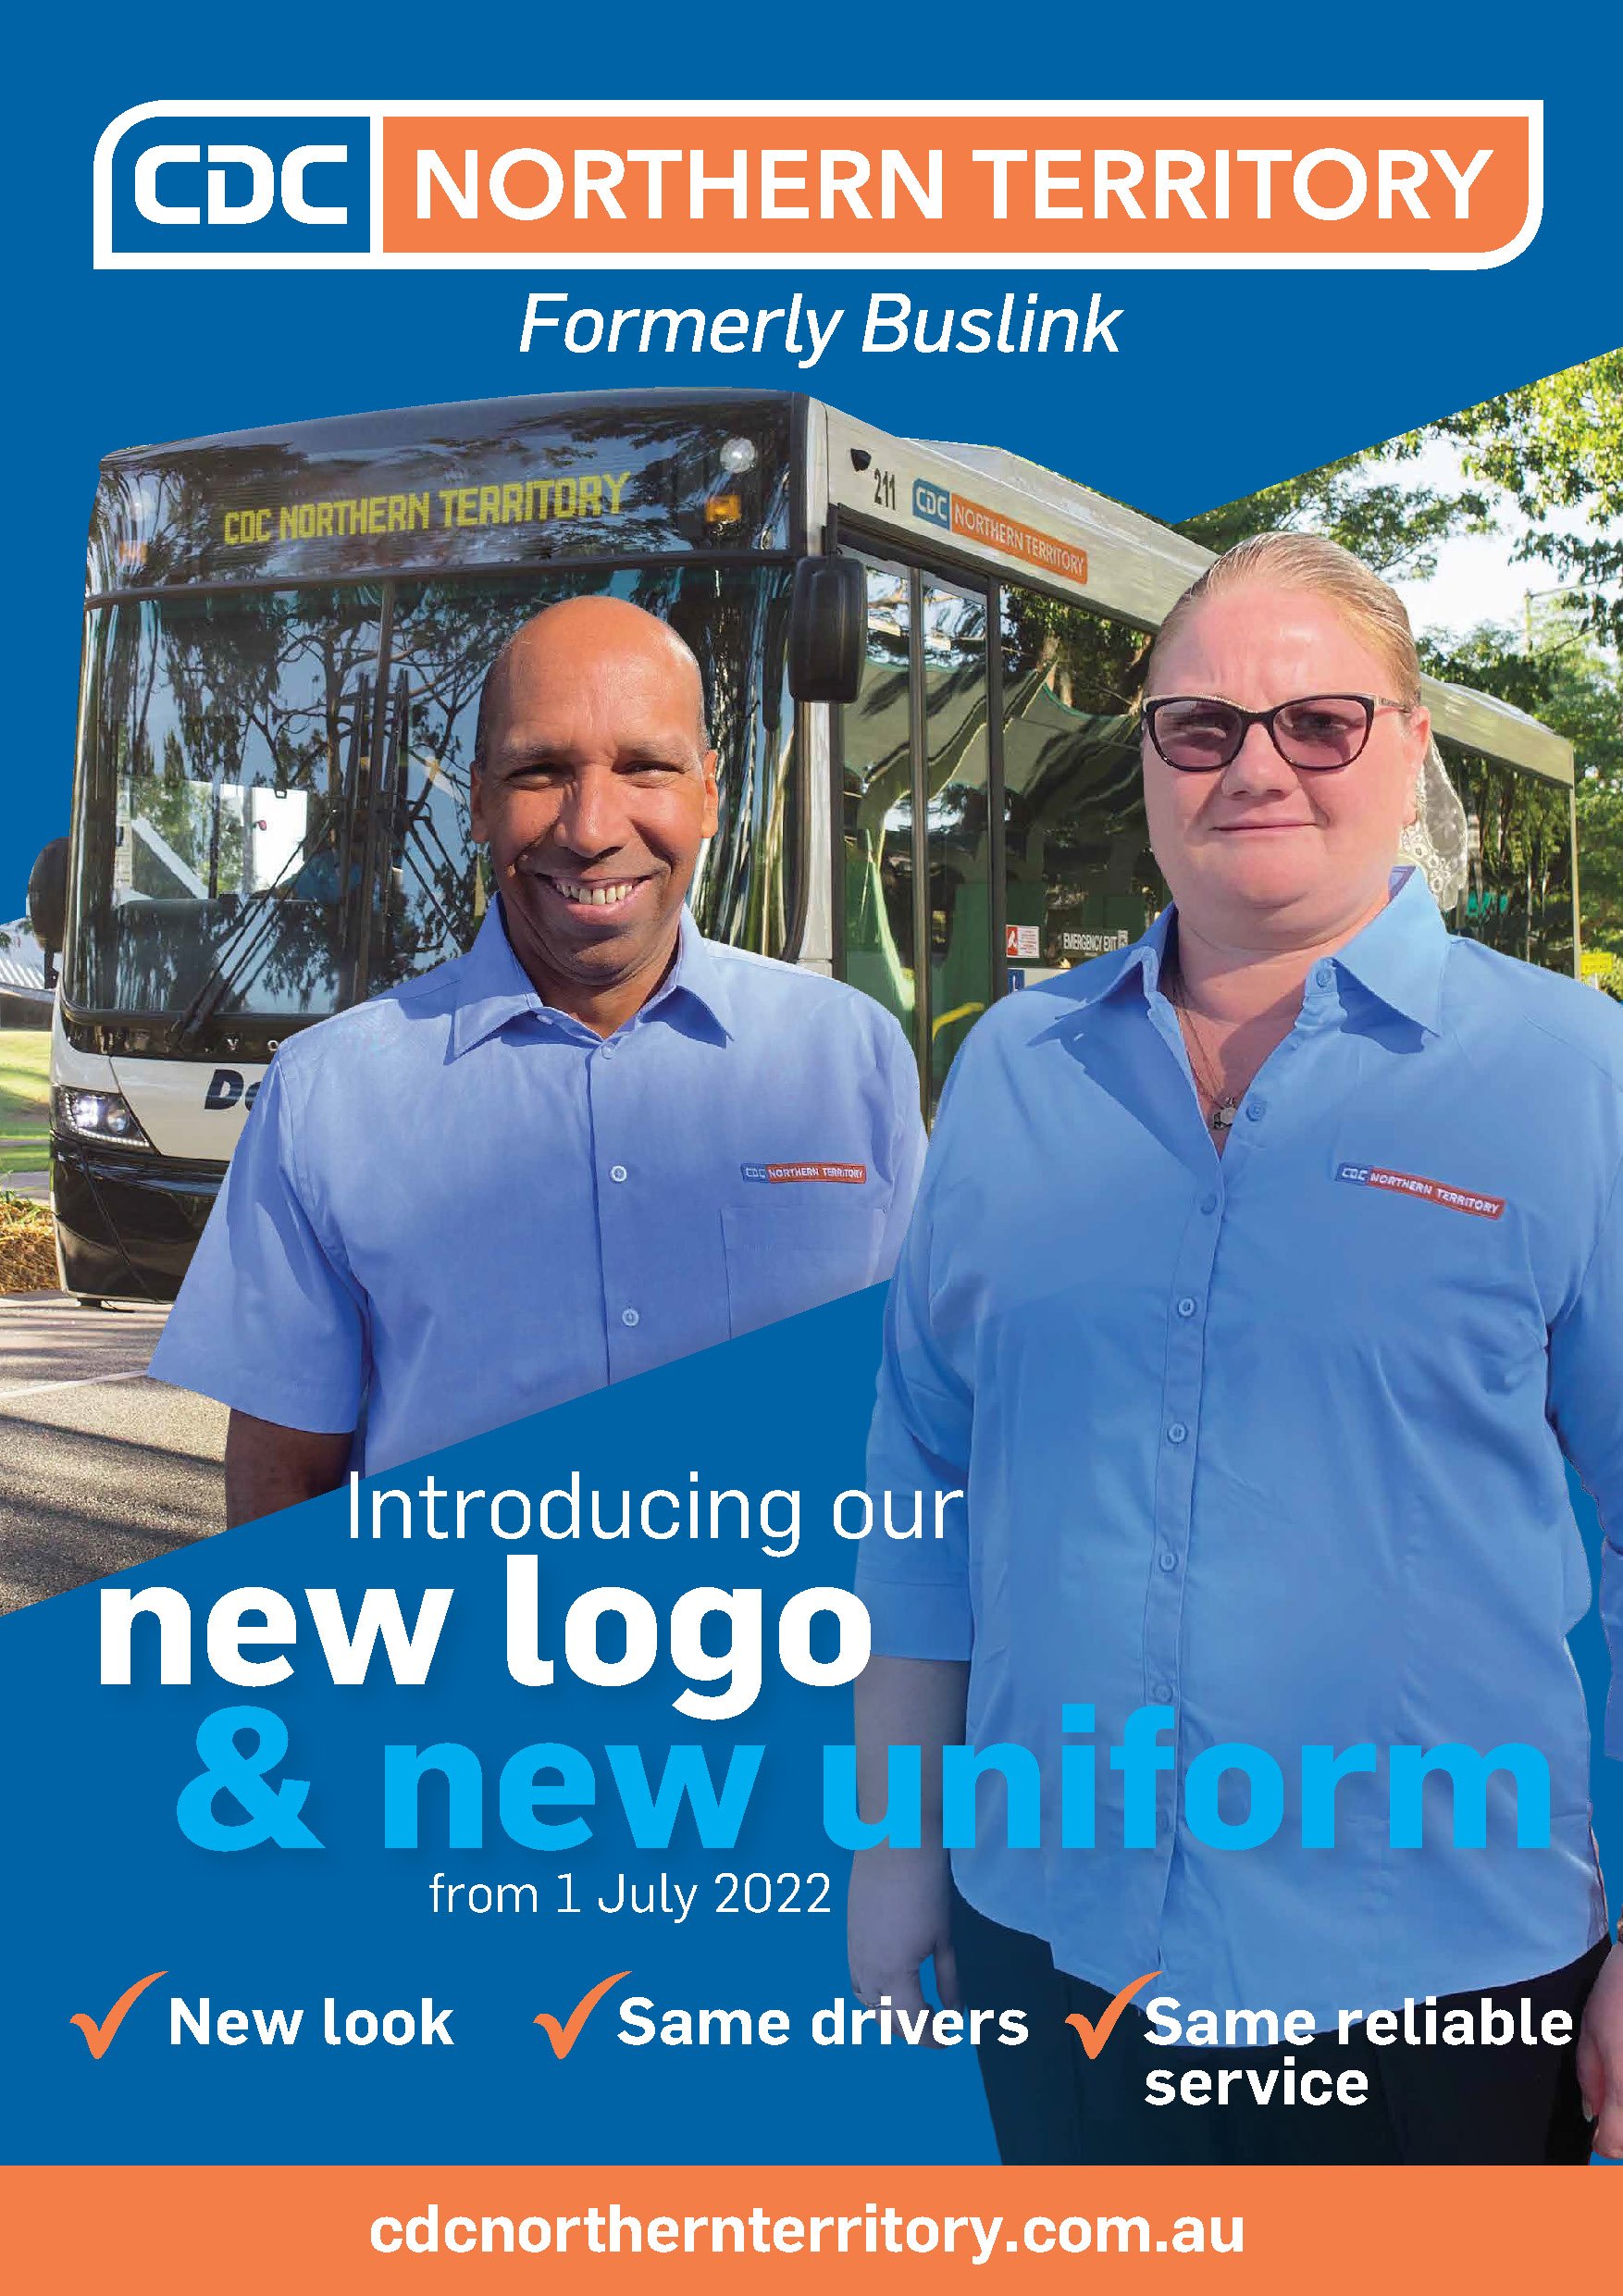 Buslink Buses and Drivers Rebranding to CDC Northern Territory